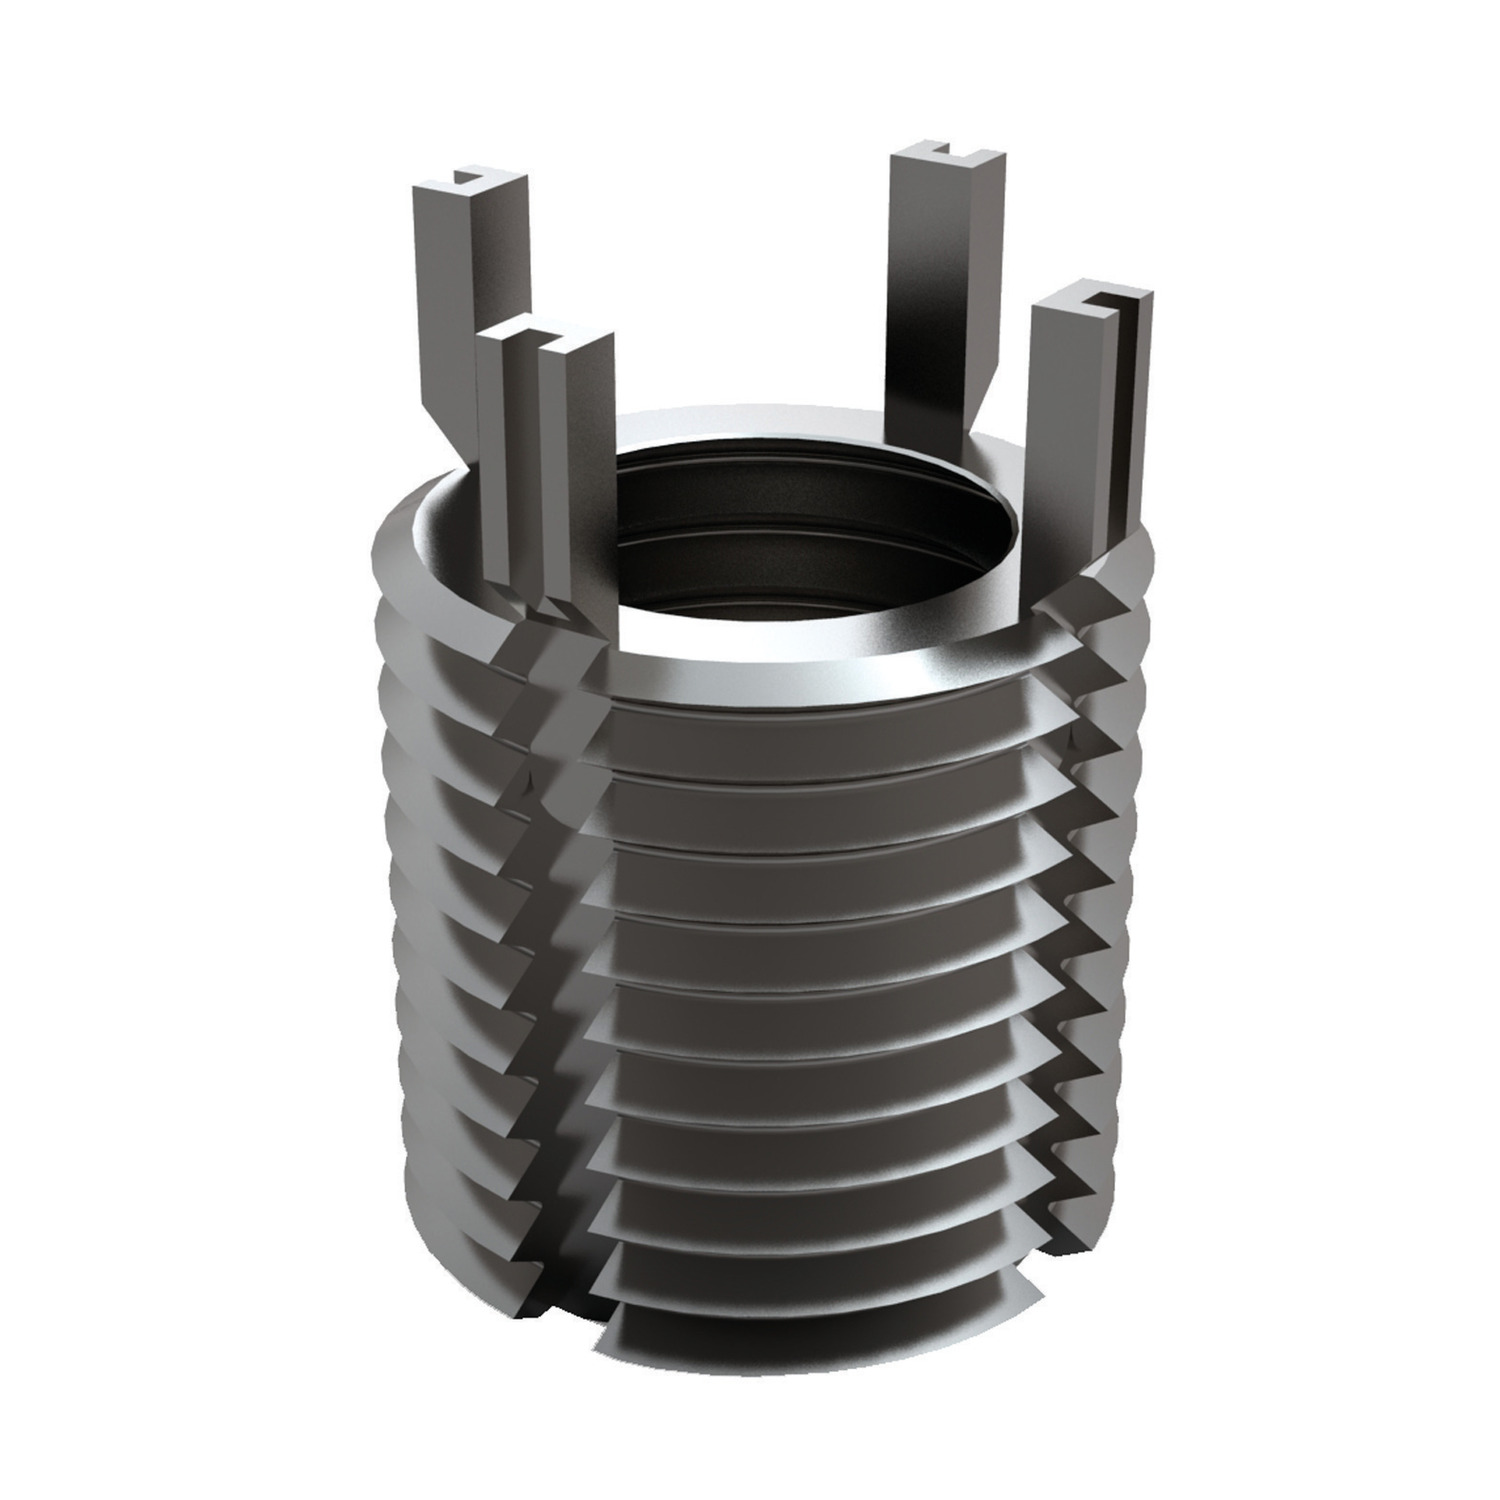 Threaded Insert - Metric Heavy duty thread inserts made from A2 stainlesss steel or steel with a phosphate finish. Easy to install.